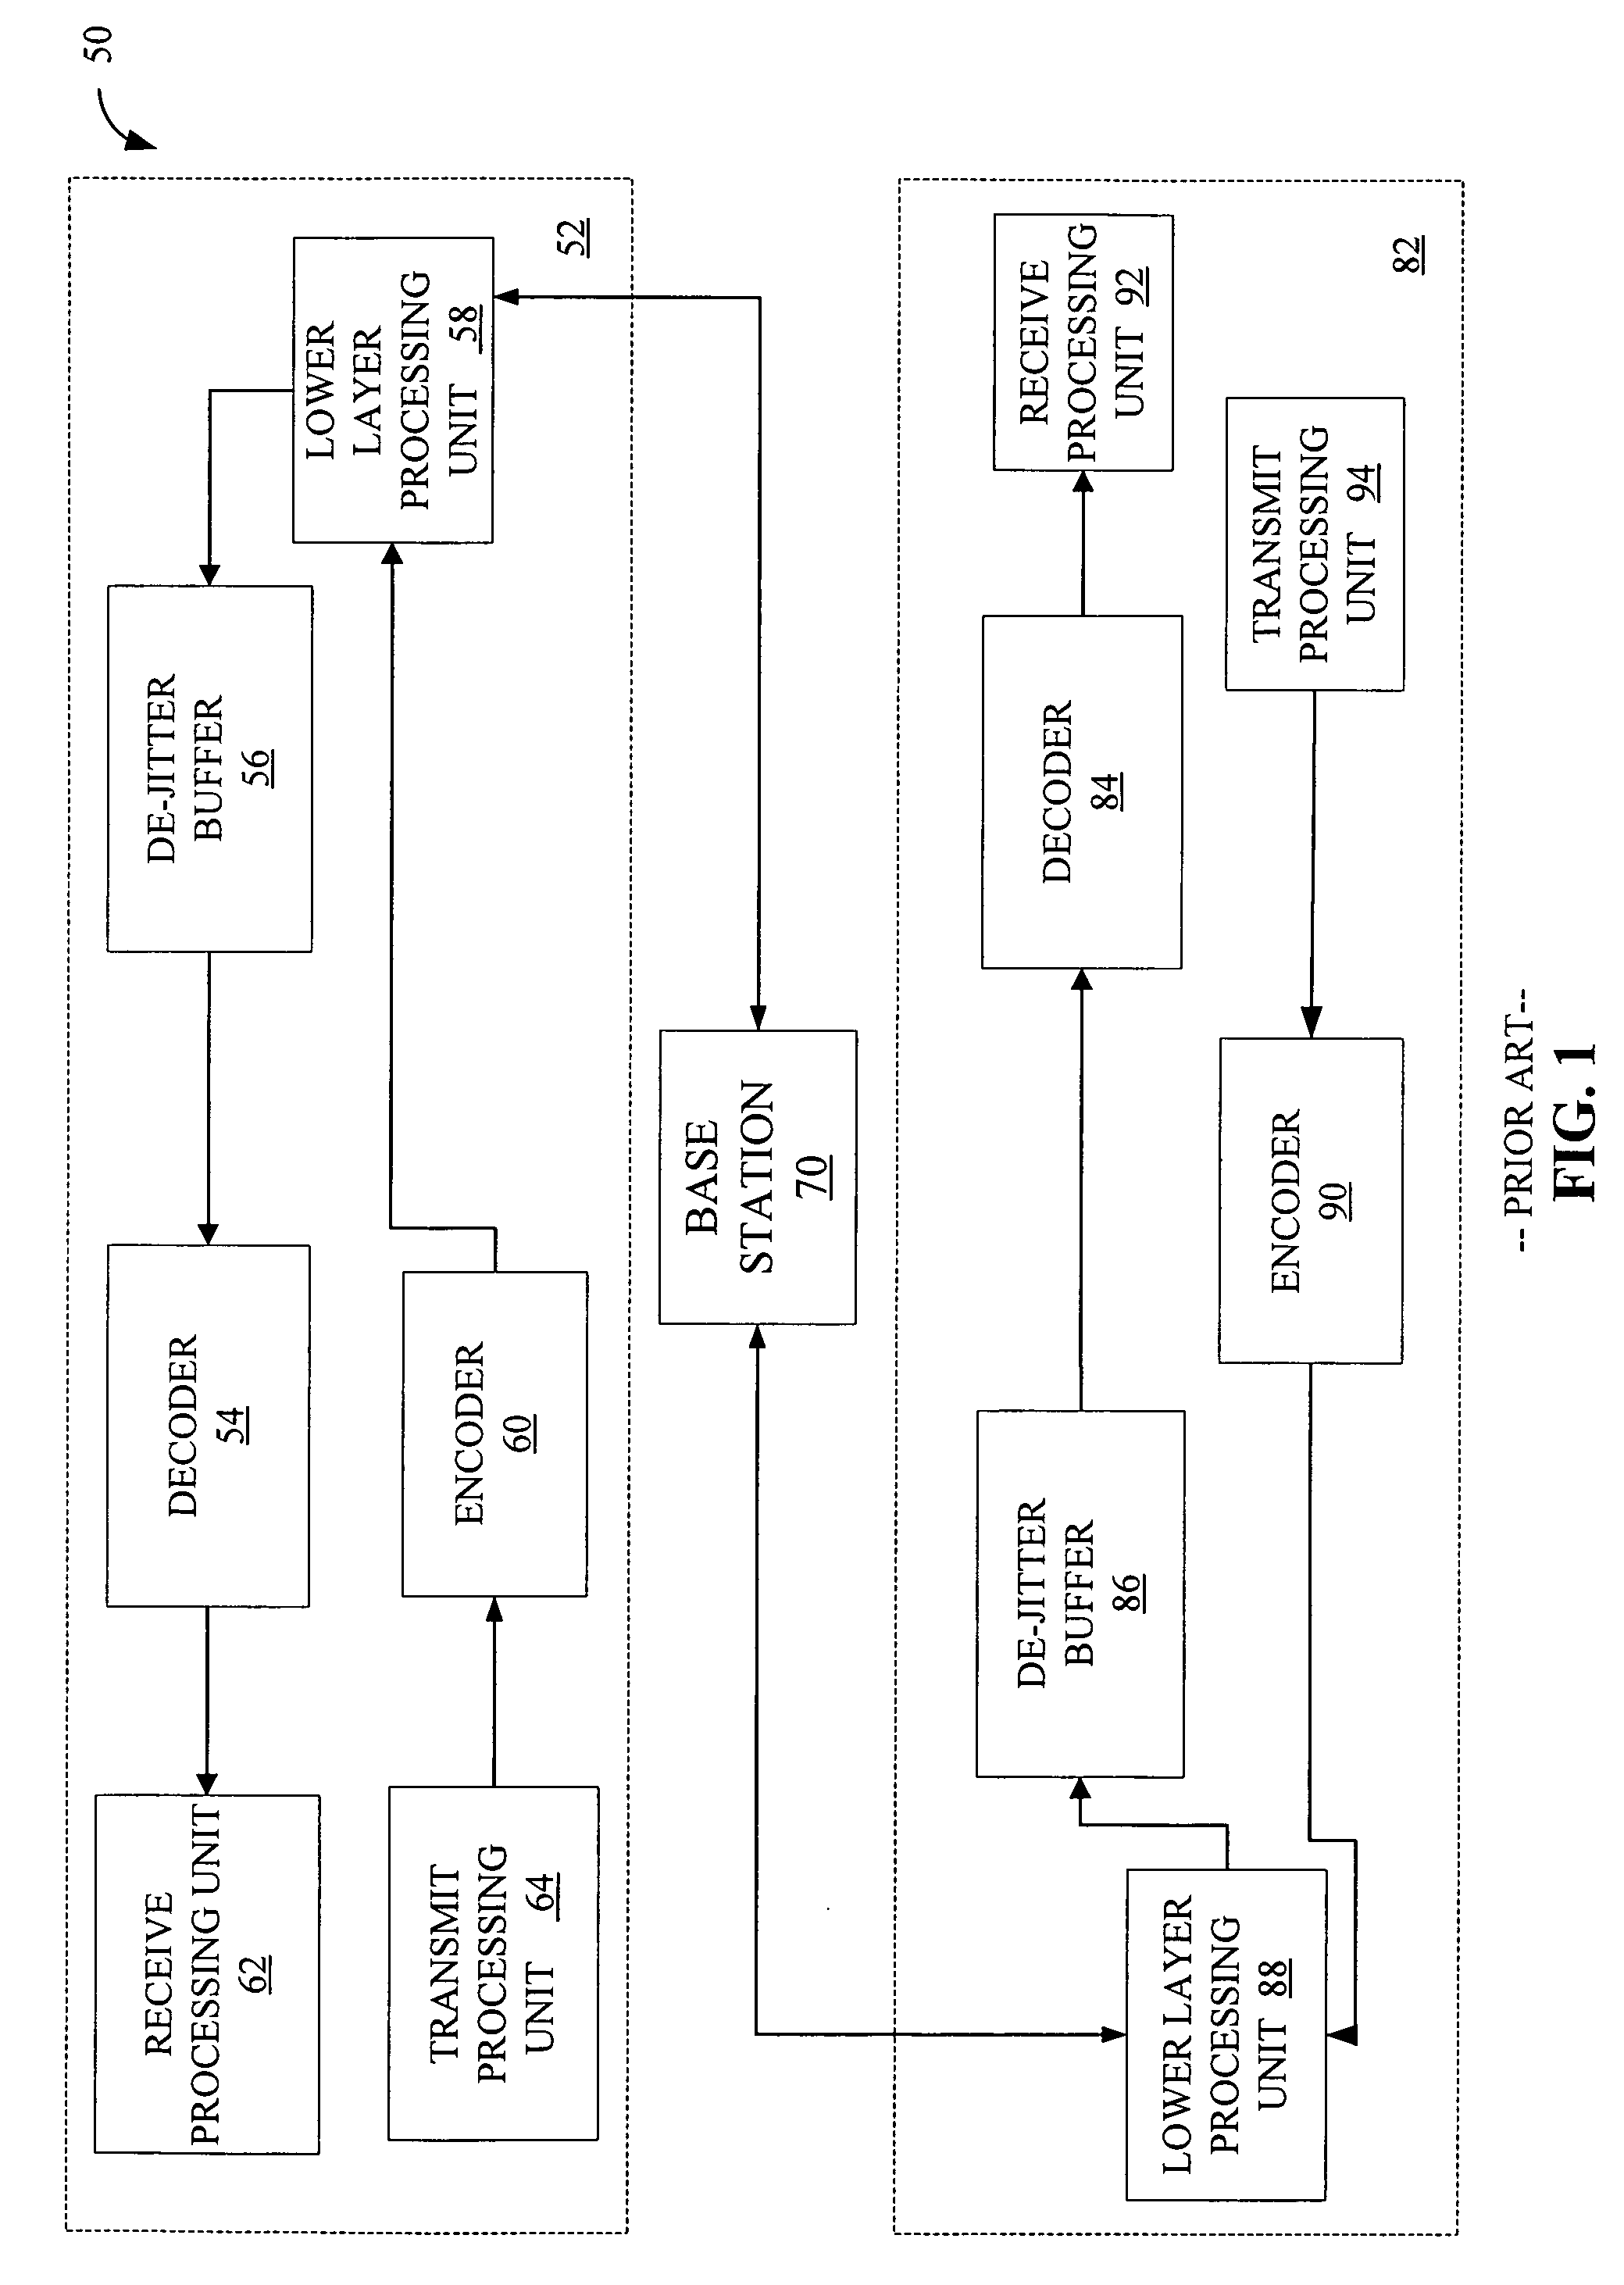 Method and apparatus for flexible packet selection in a wireless communication system